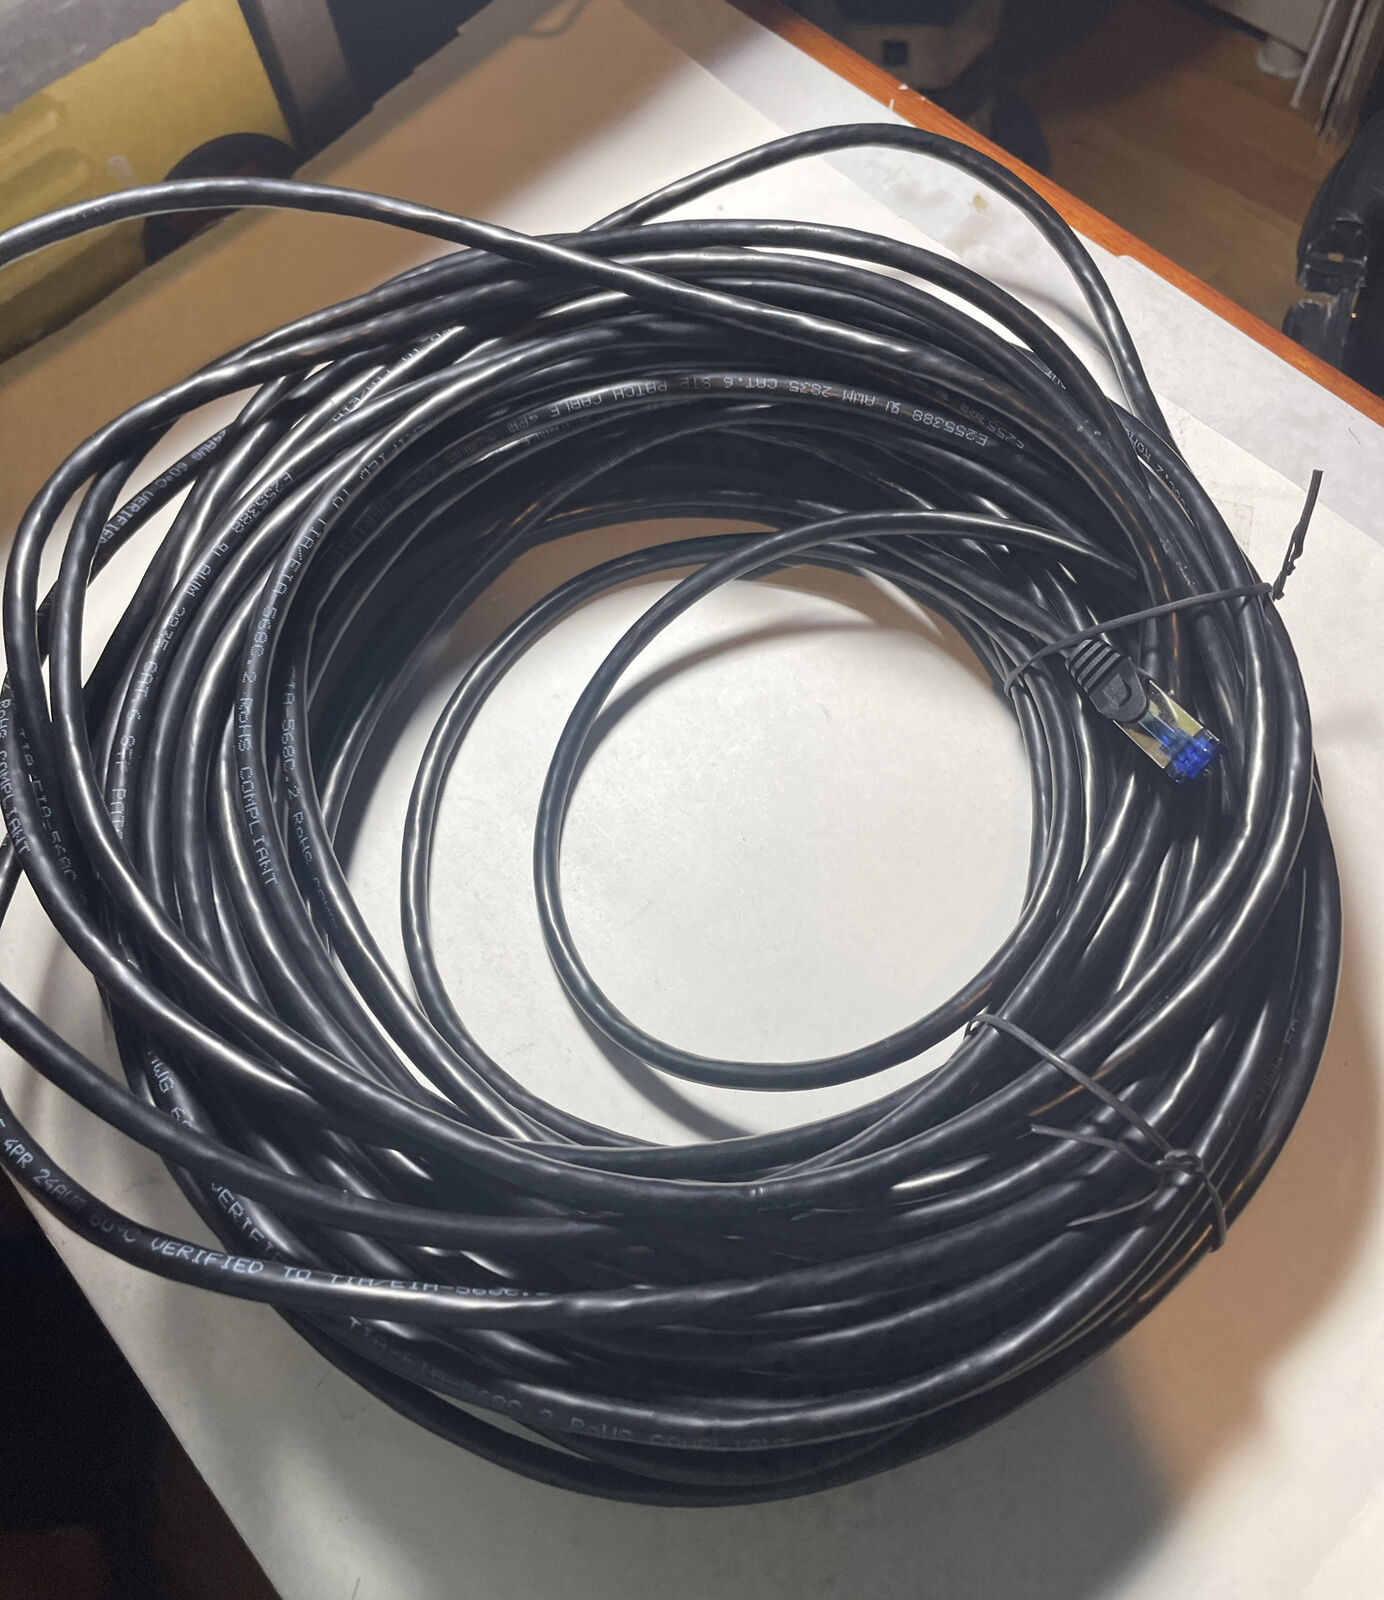 New 100' FT Feet CAT 6 24AWG Patch Cable Black/ Rohs Compliant